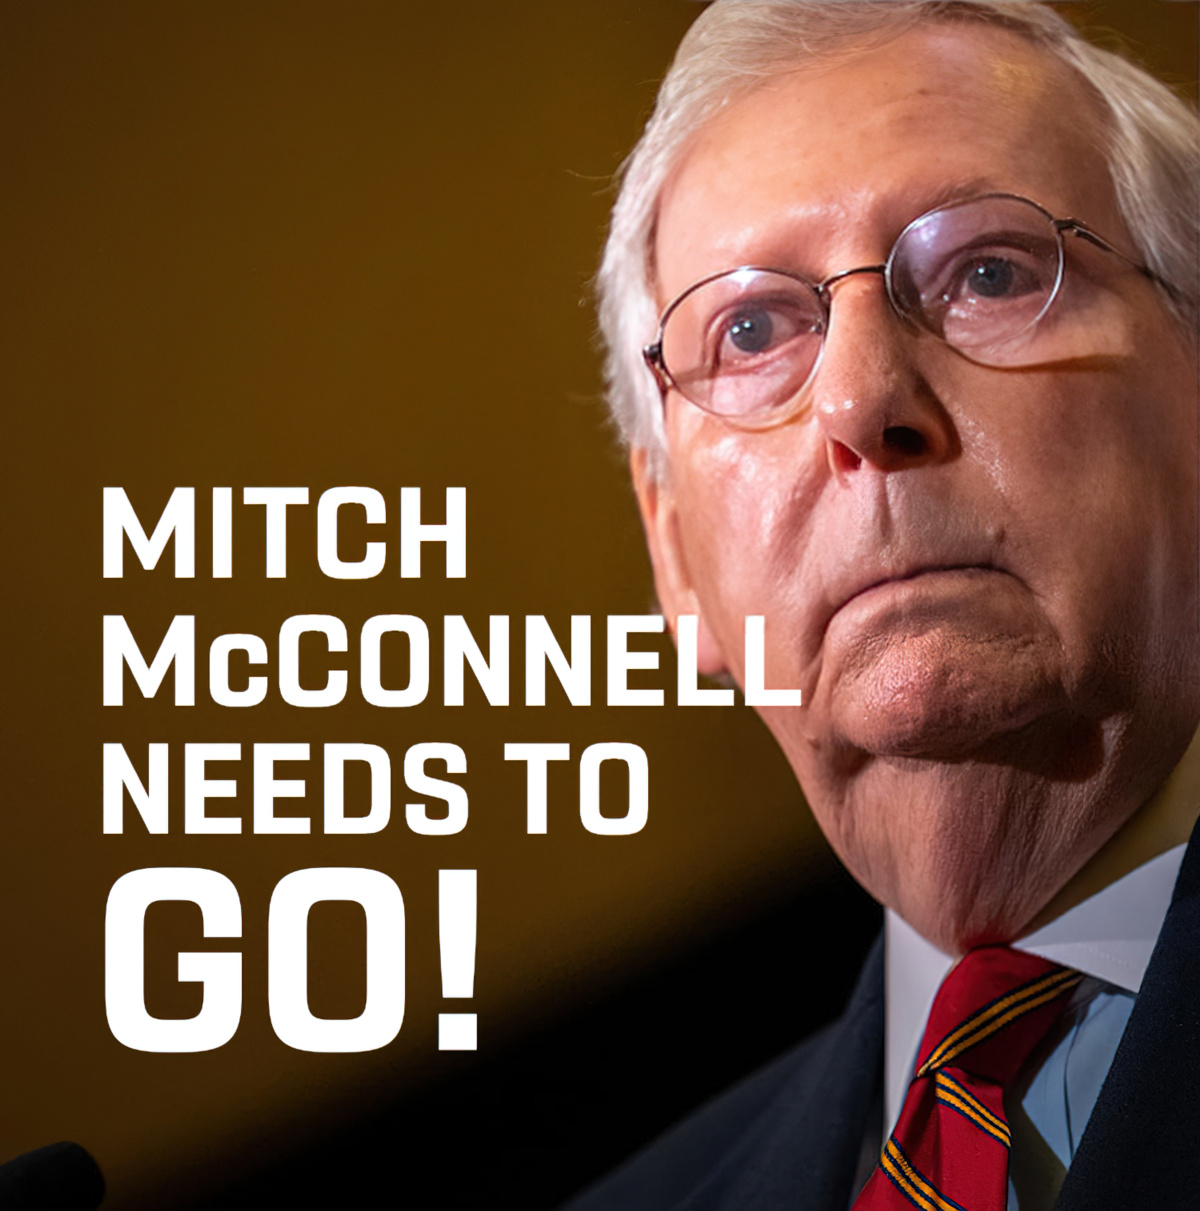 Mitch McConnell needs to go!